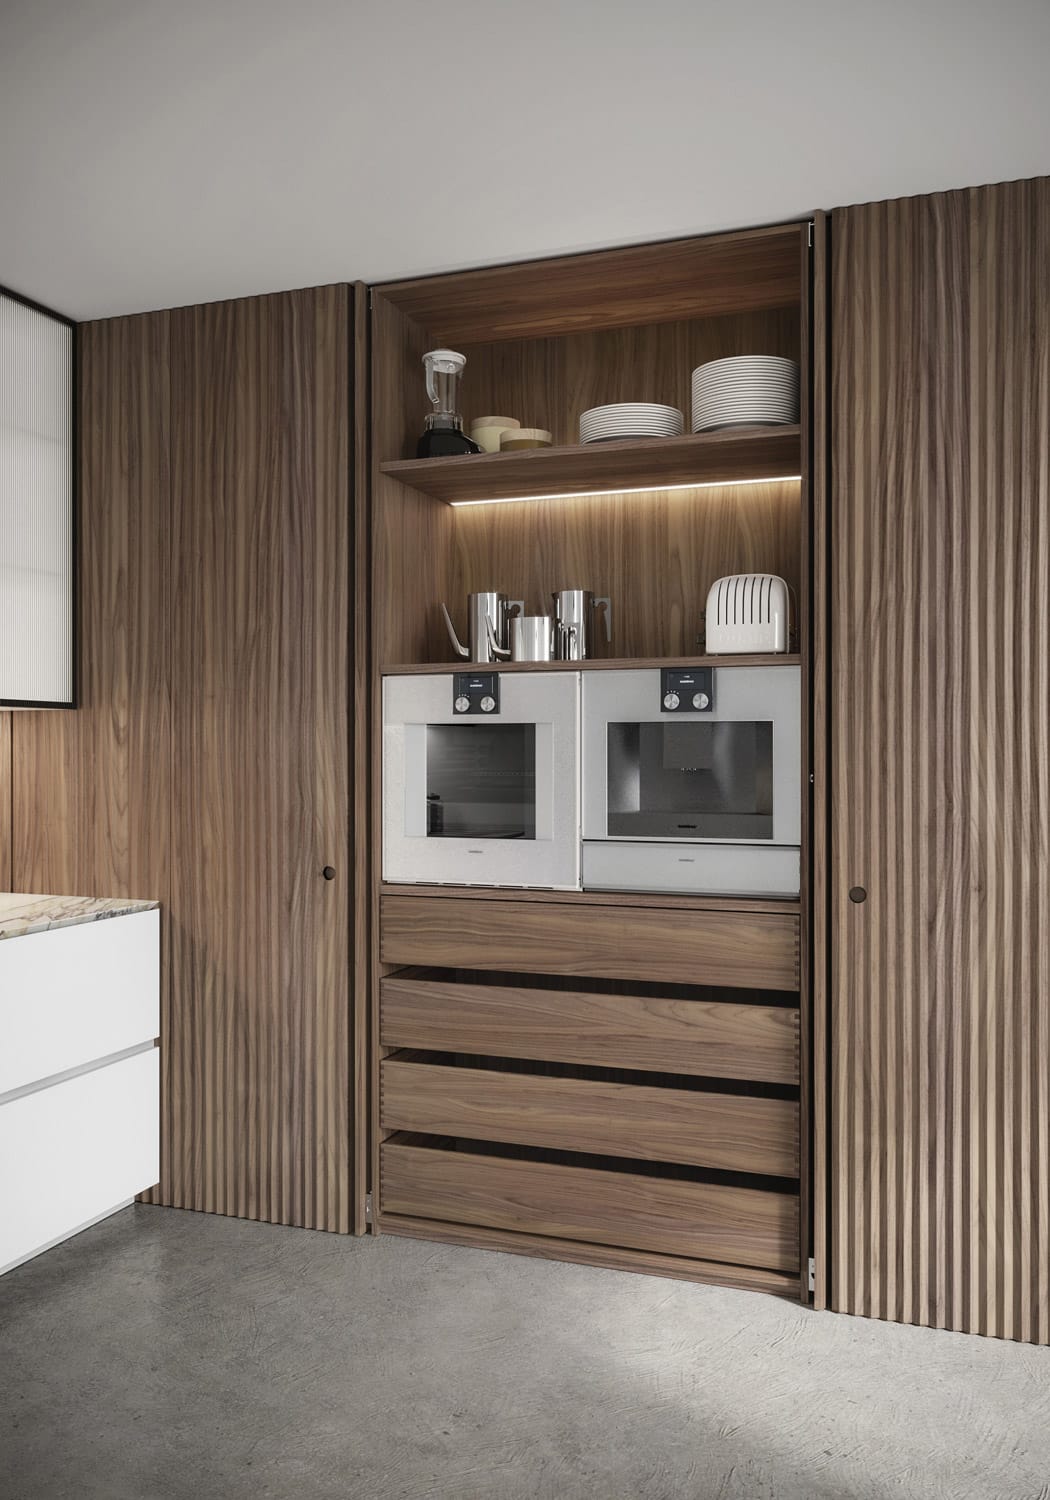 Each section of the pantry area was customized to the user’s needs. This unit has pocket doors that fold away inside the cabinet and interiors that match the Canaletto Walnut of the exterior doors. 